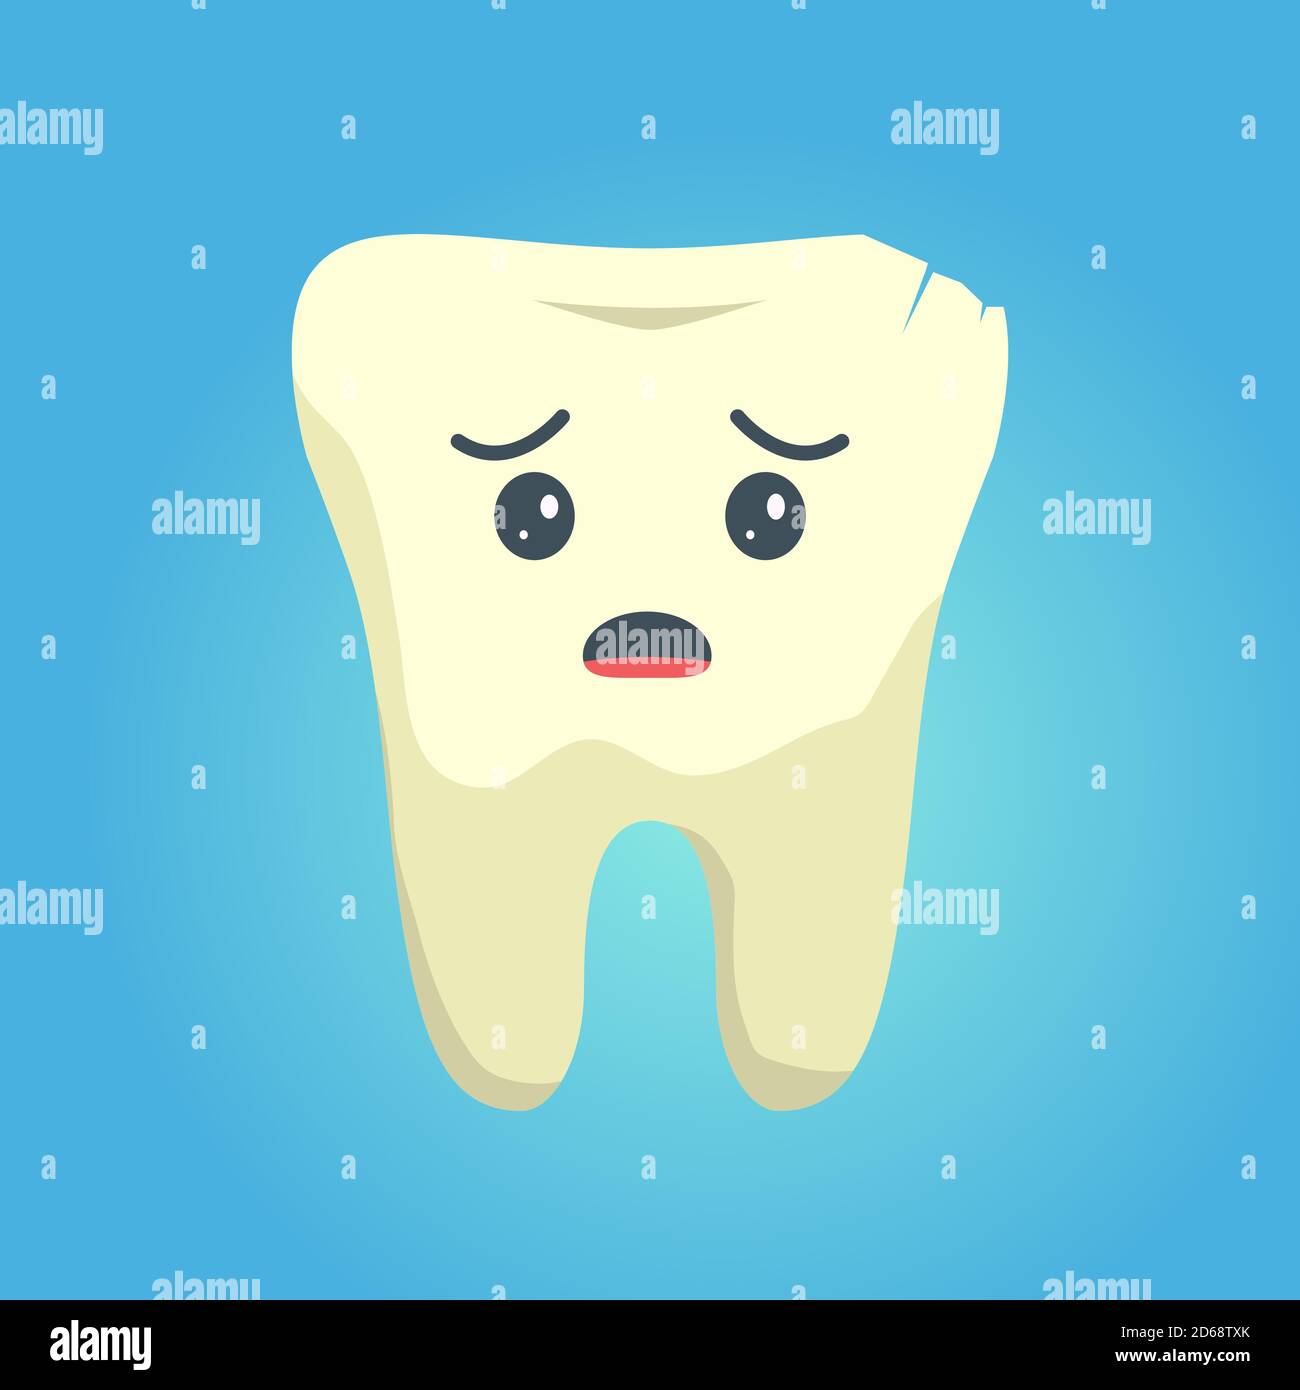 Sick tooth.Emoji character.Design concept for a dental clinic. Stock Vector